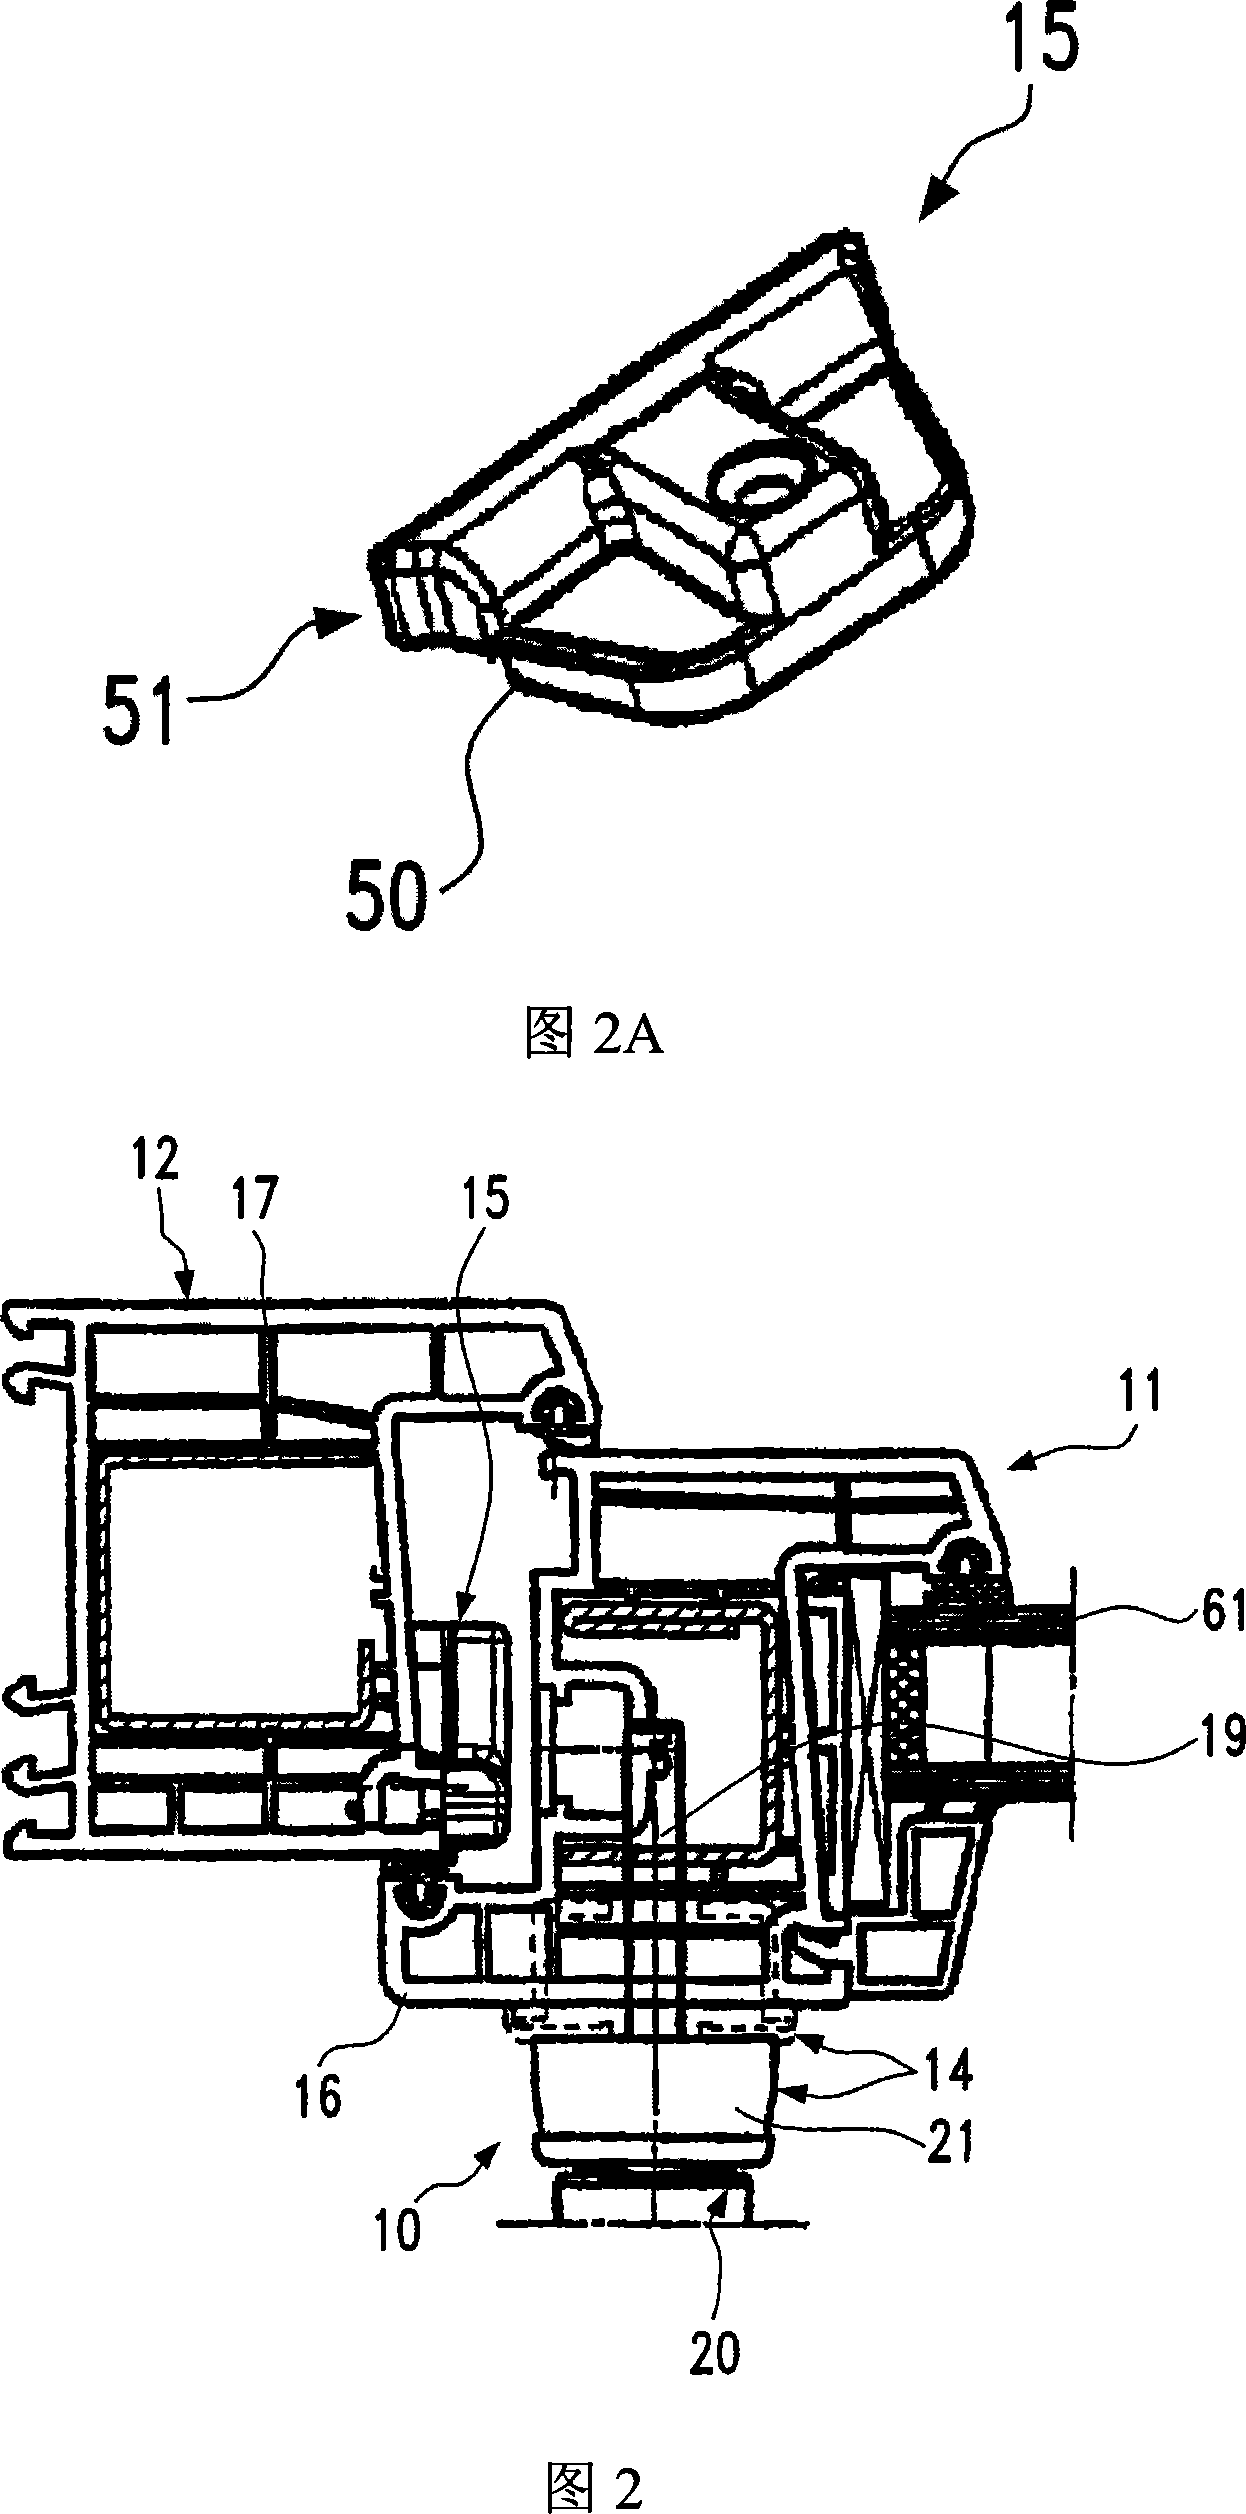 Monitoring device for the door and window